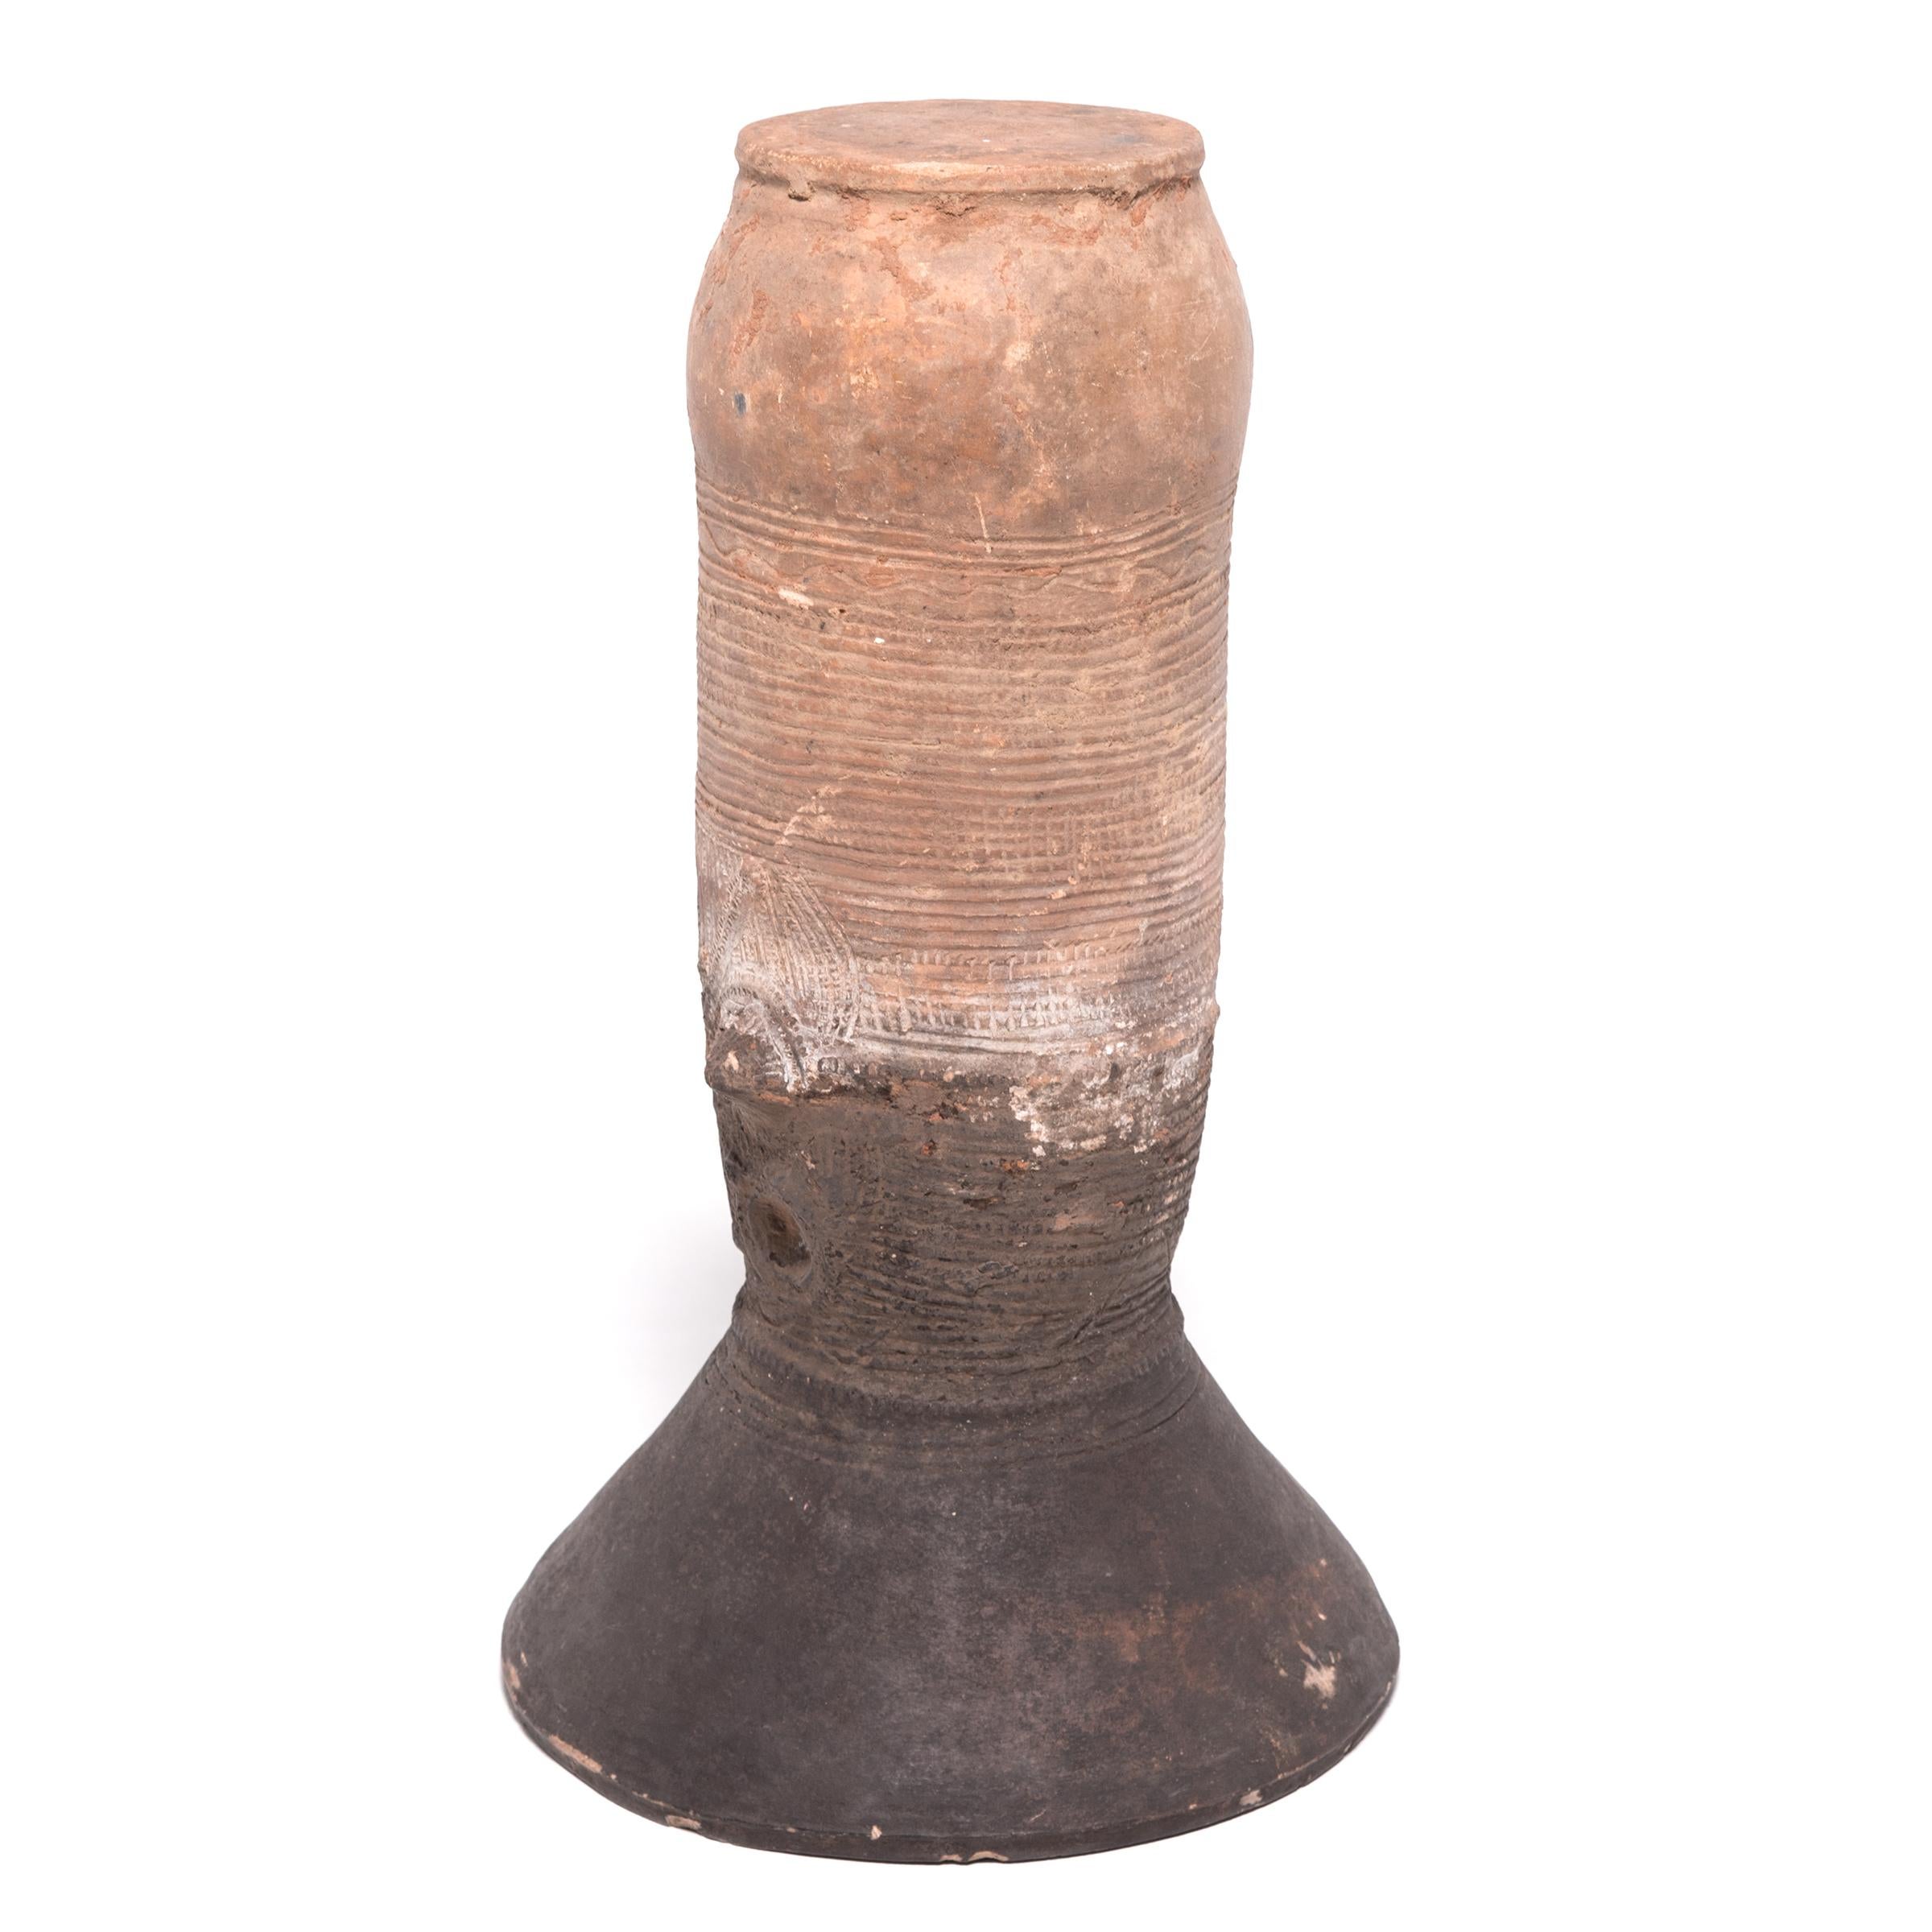 The Nupe people of Nigeria were touted as some of the finest ceramicists in Africa. Everyday objects like this elegant, cylindrical vessel support received detailed attention. This flaring terracotta form would have been buried halfway in the ground